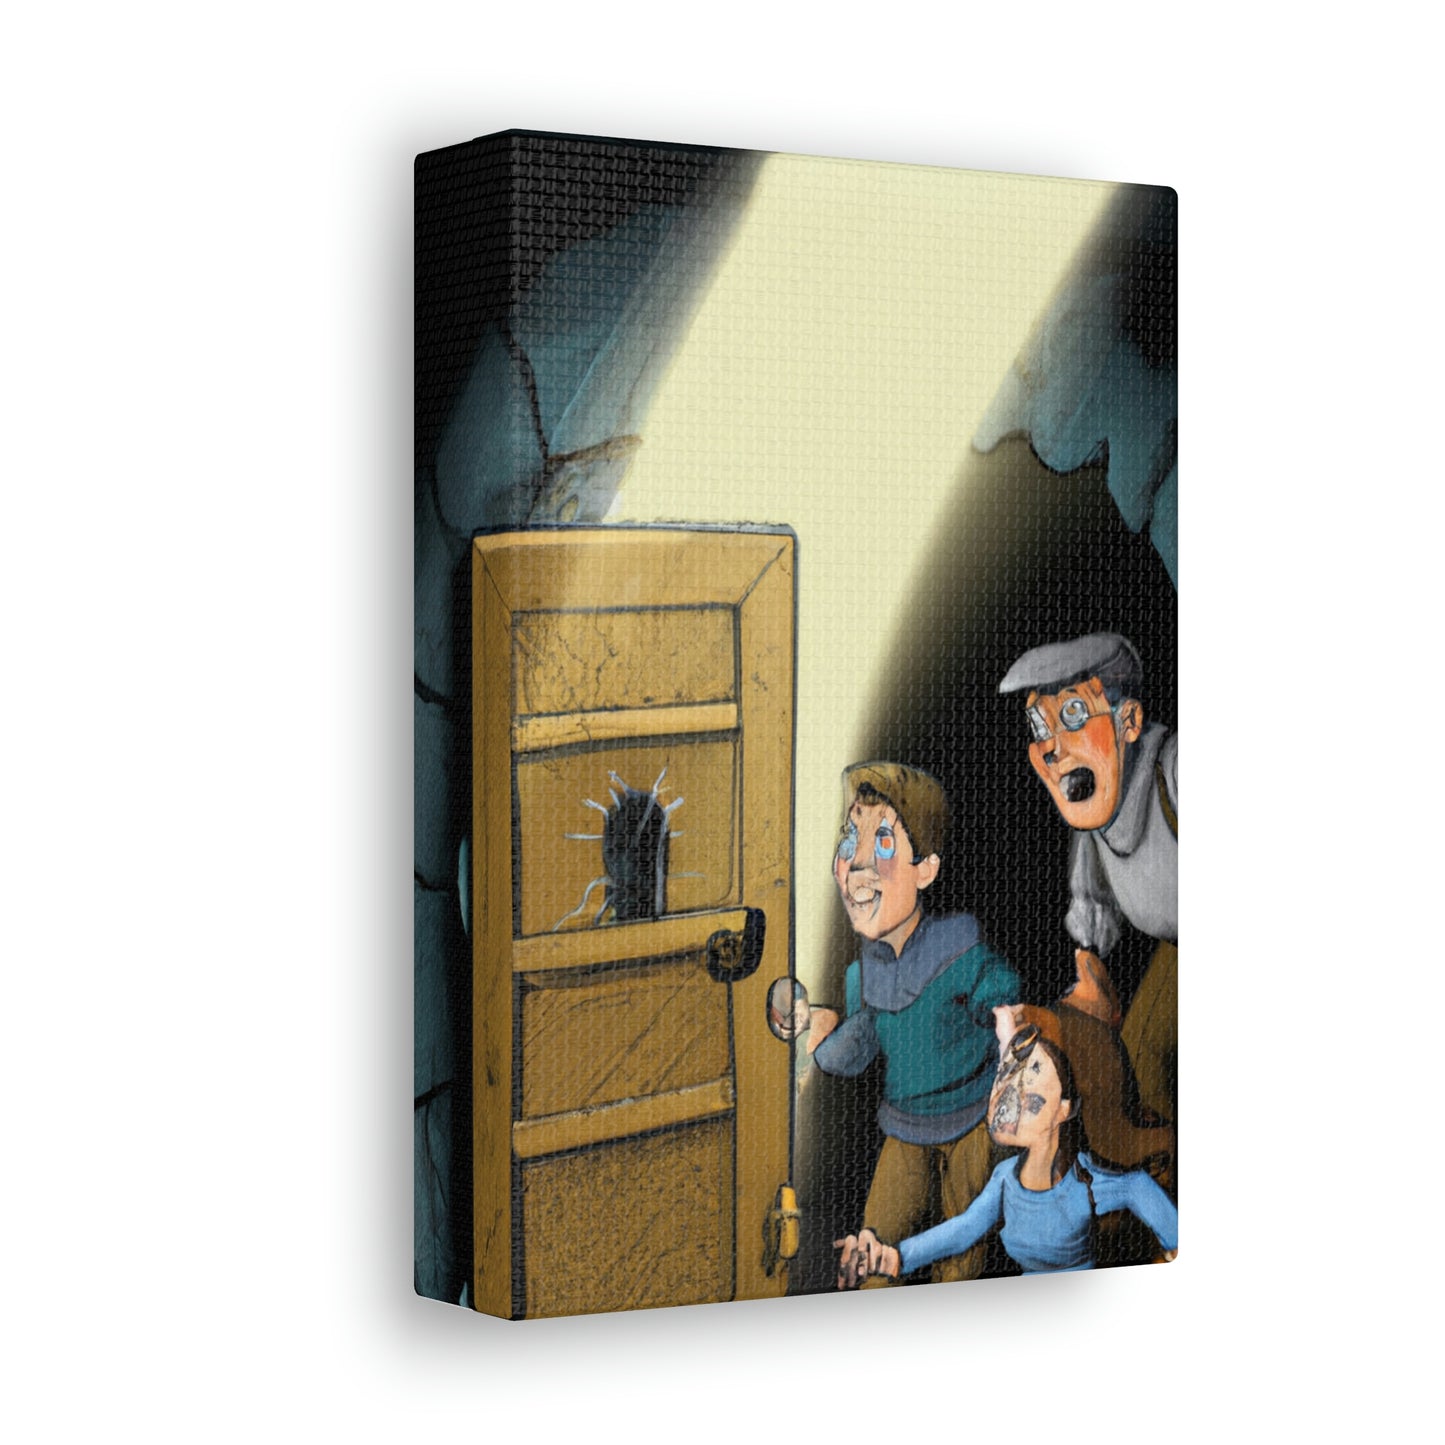 "The Mysterious Door in the Basement." - The Alien Canva